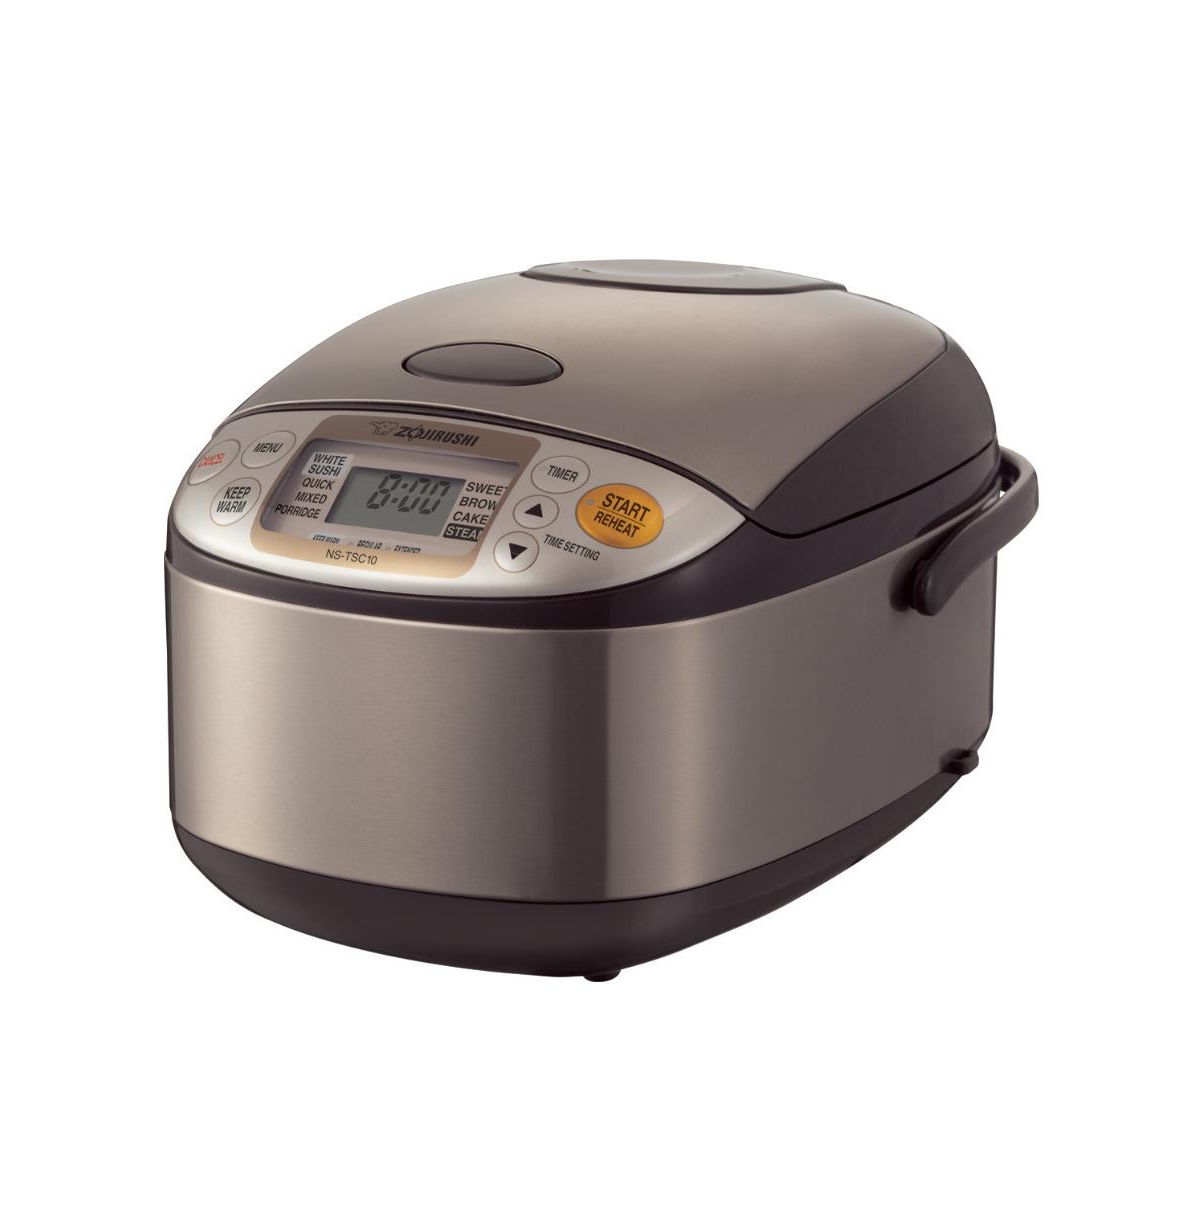 5.5-Cup Micom Rice Cooker and Warmer Stainless Brown) with Knife Set - Dark Grey